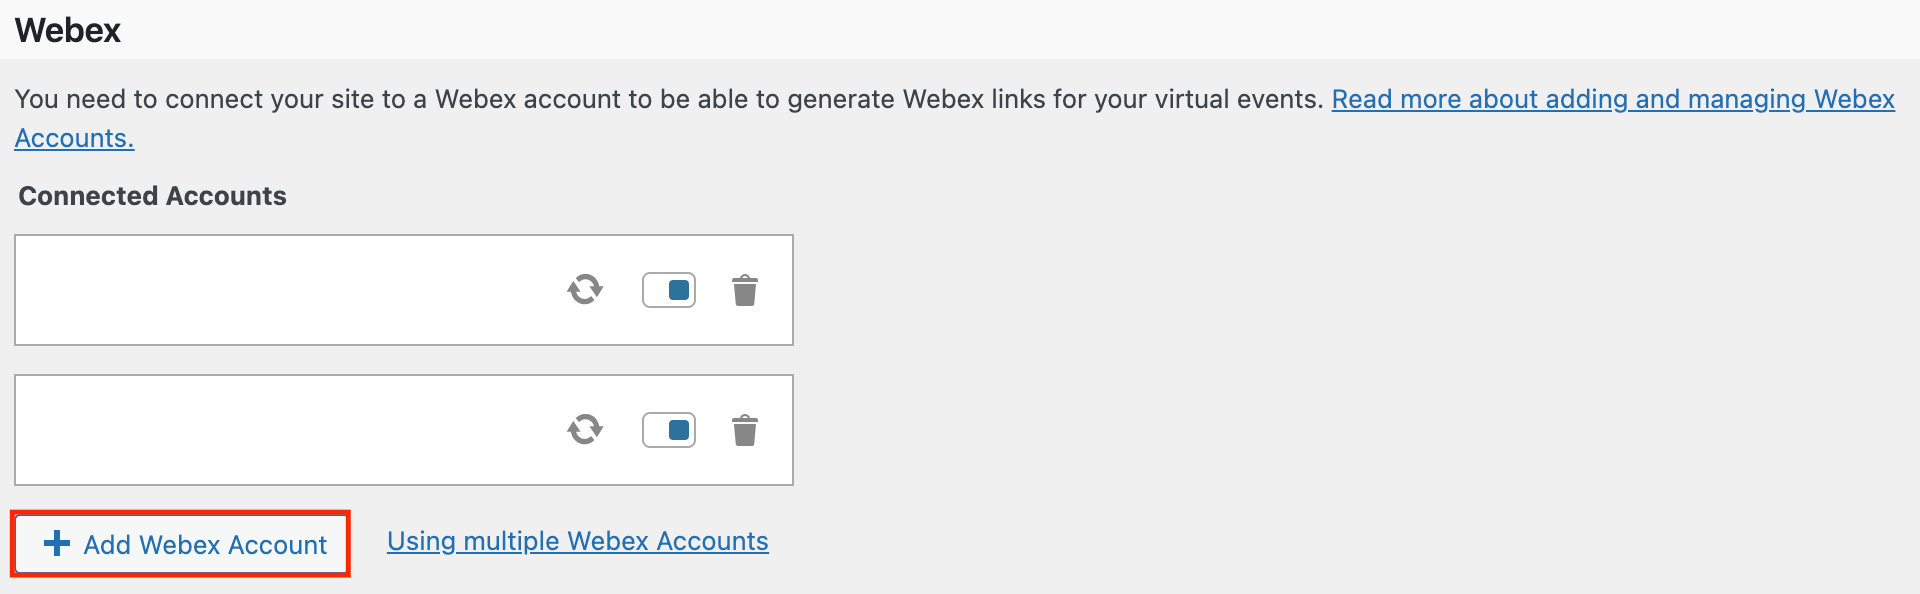 Connect to Webex under Events Settings > Integrations